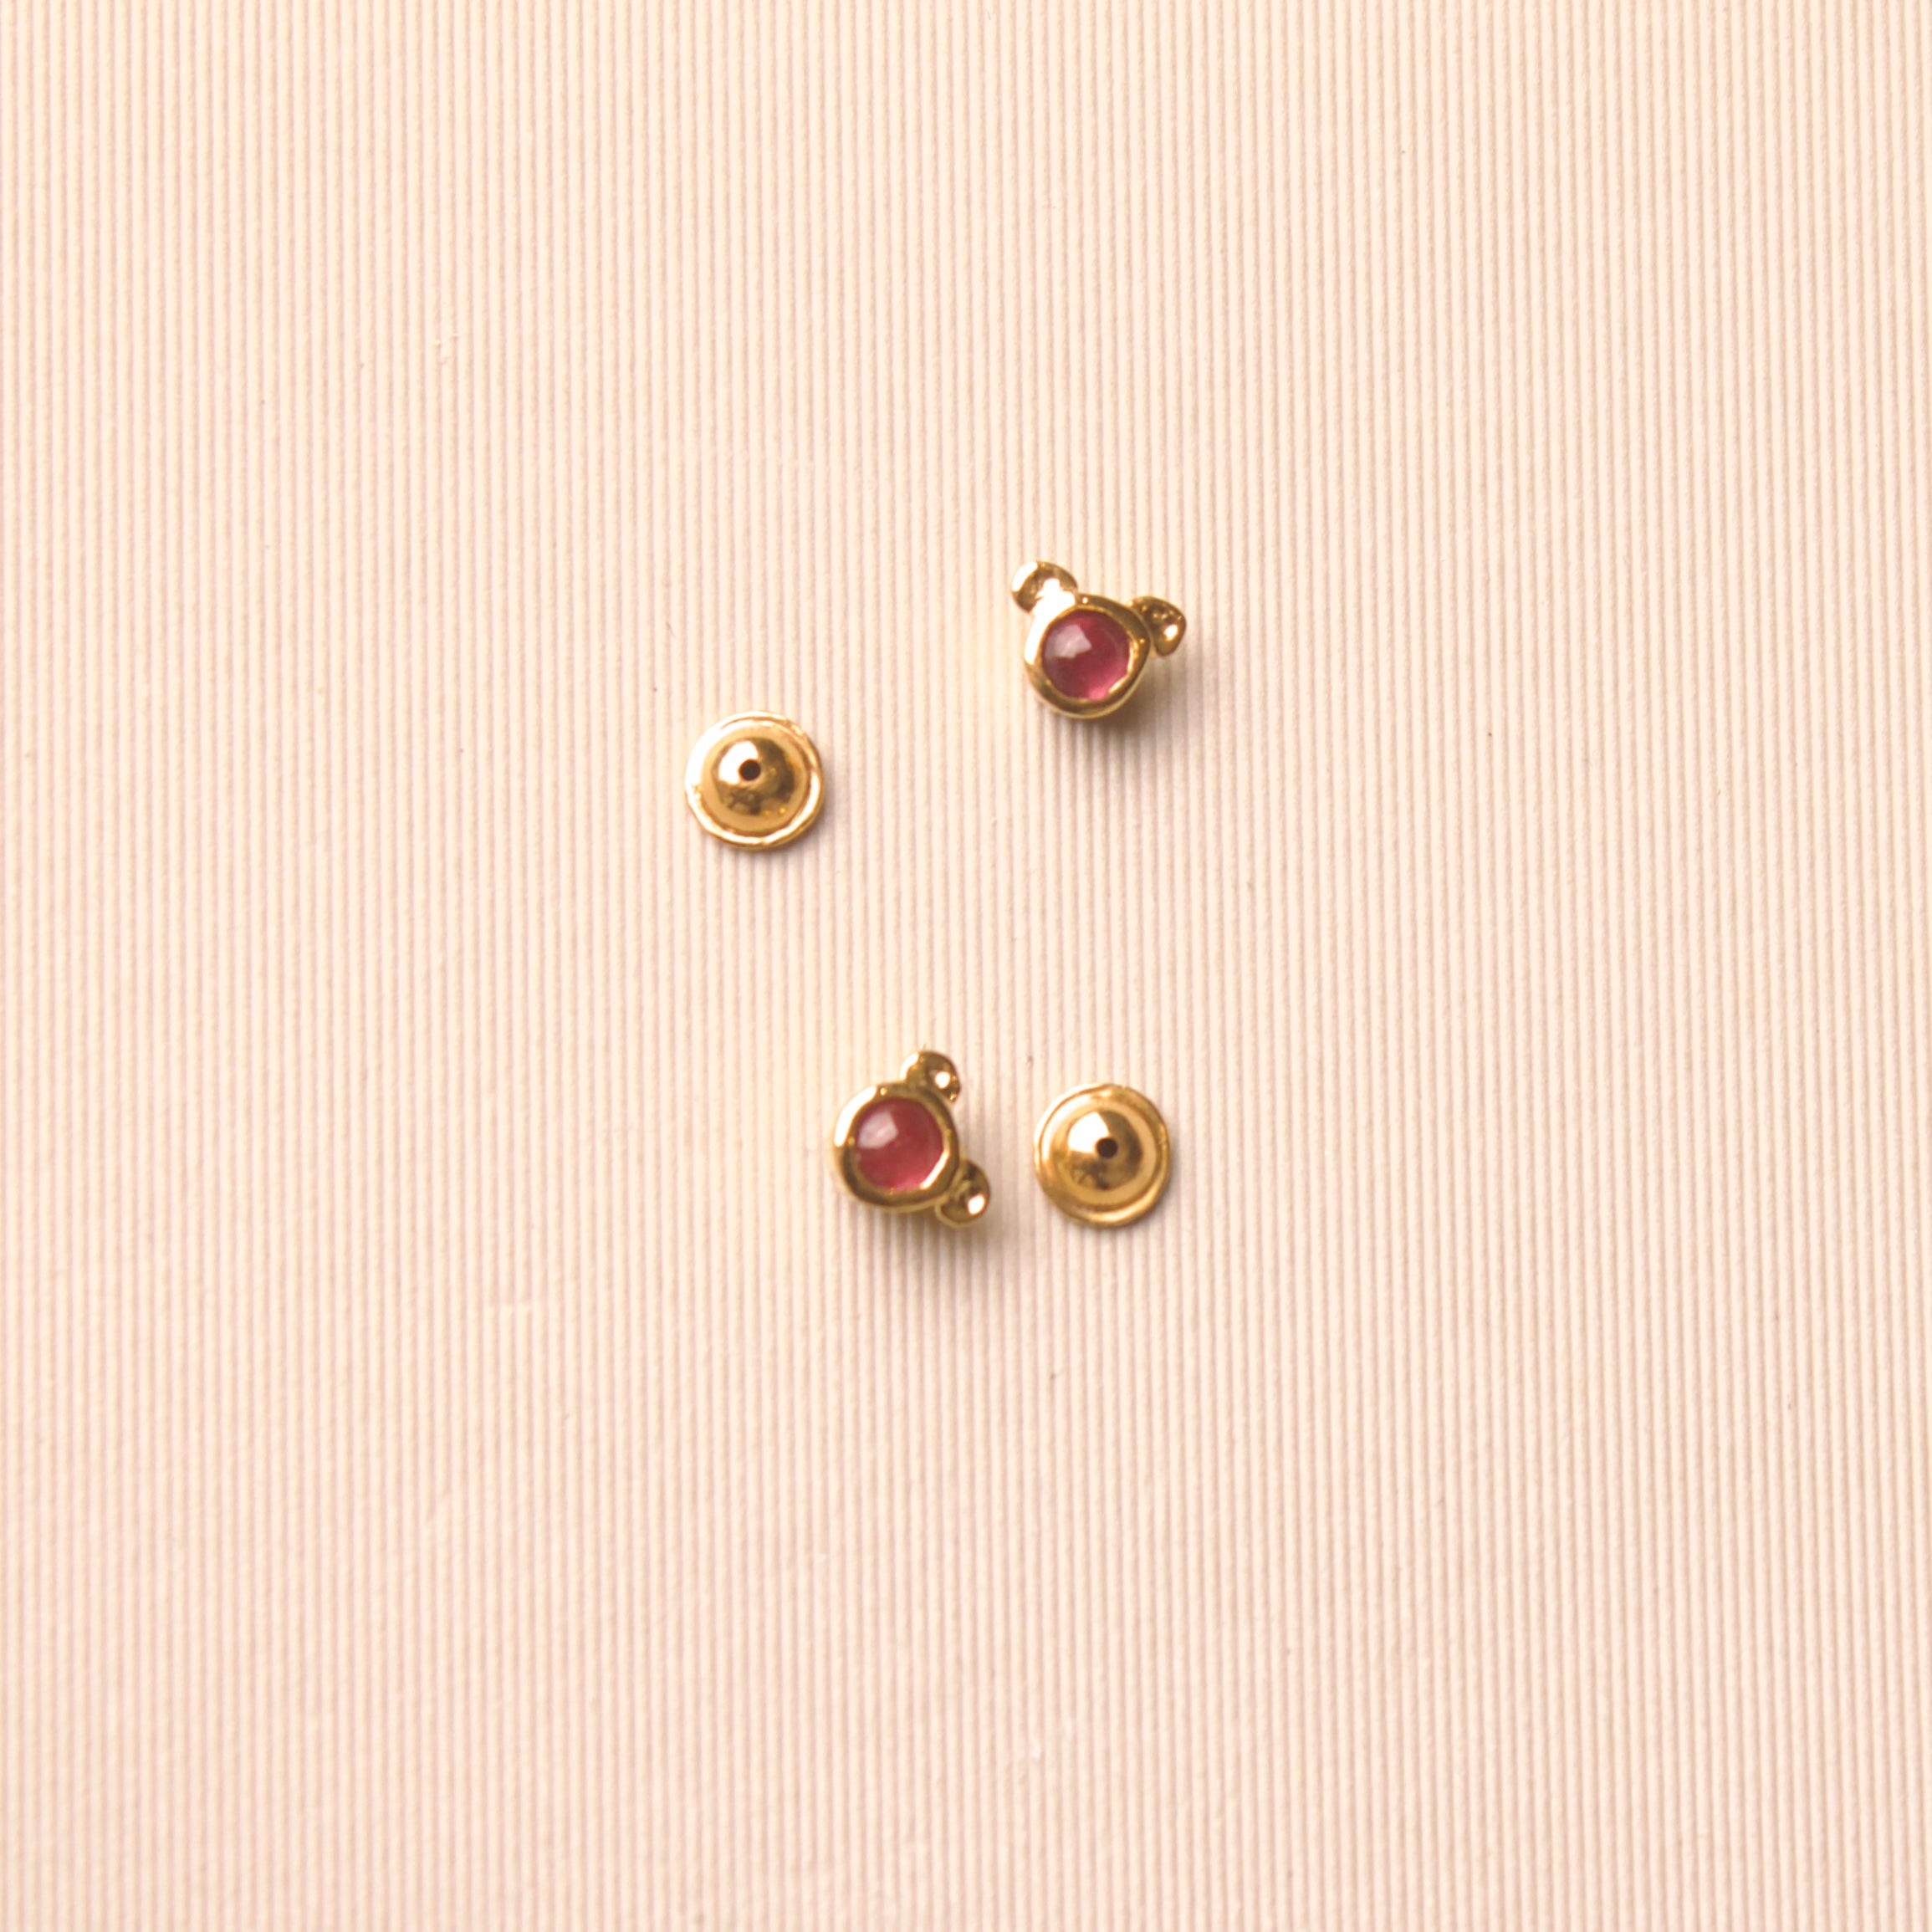 Certified Natural Burma Ruby Cabochon Pear Diamond 18K Gold Stud Earring -  Etsy